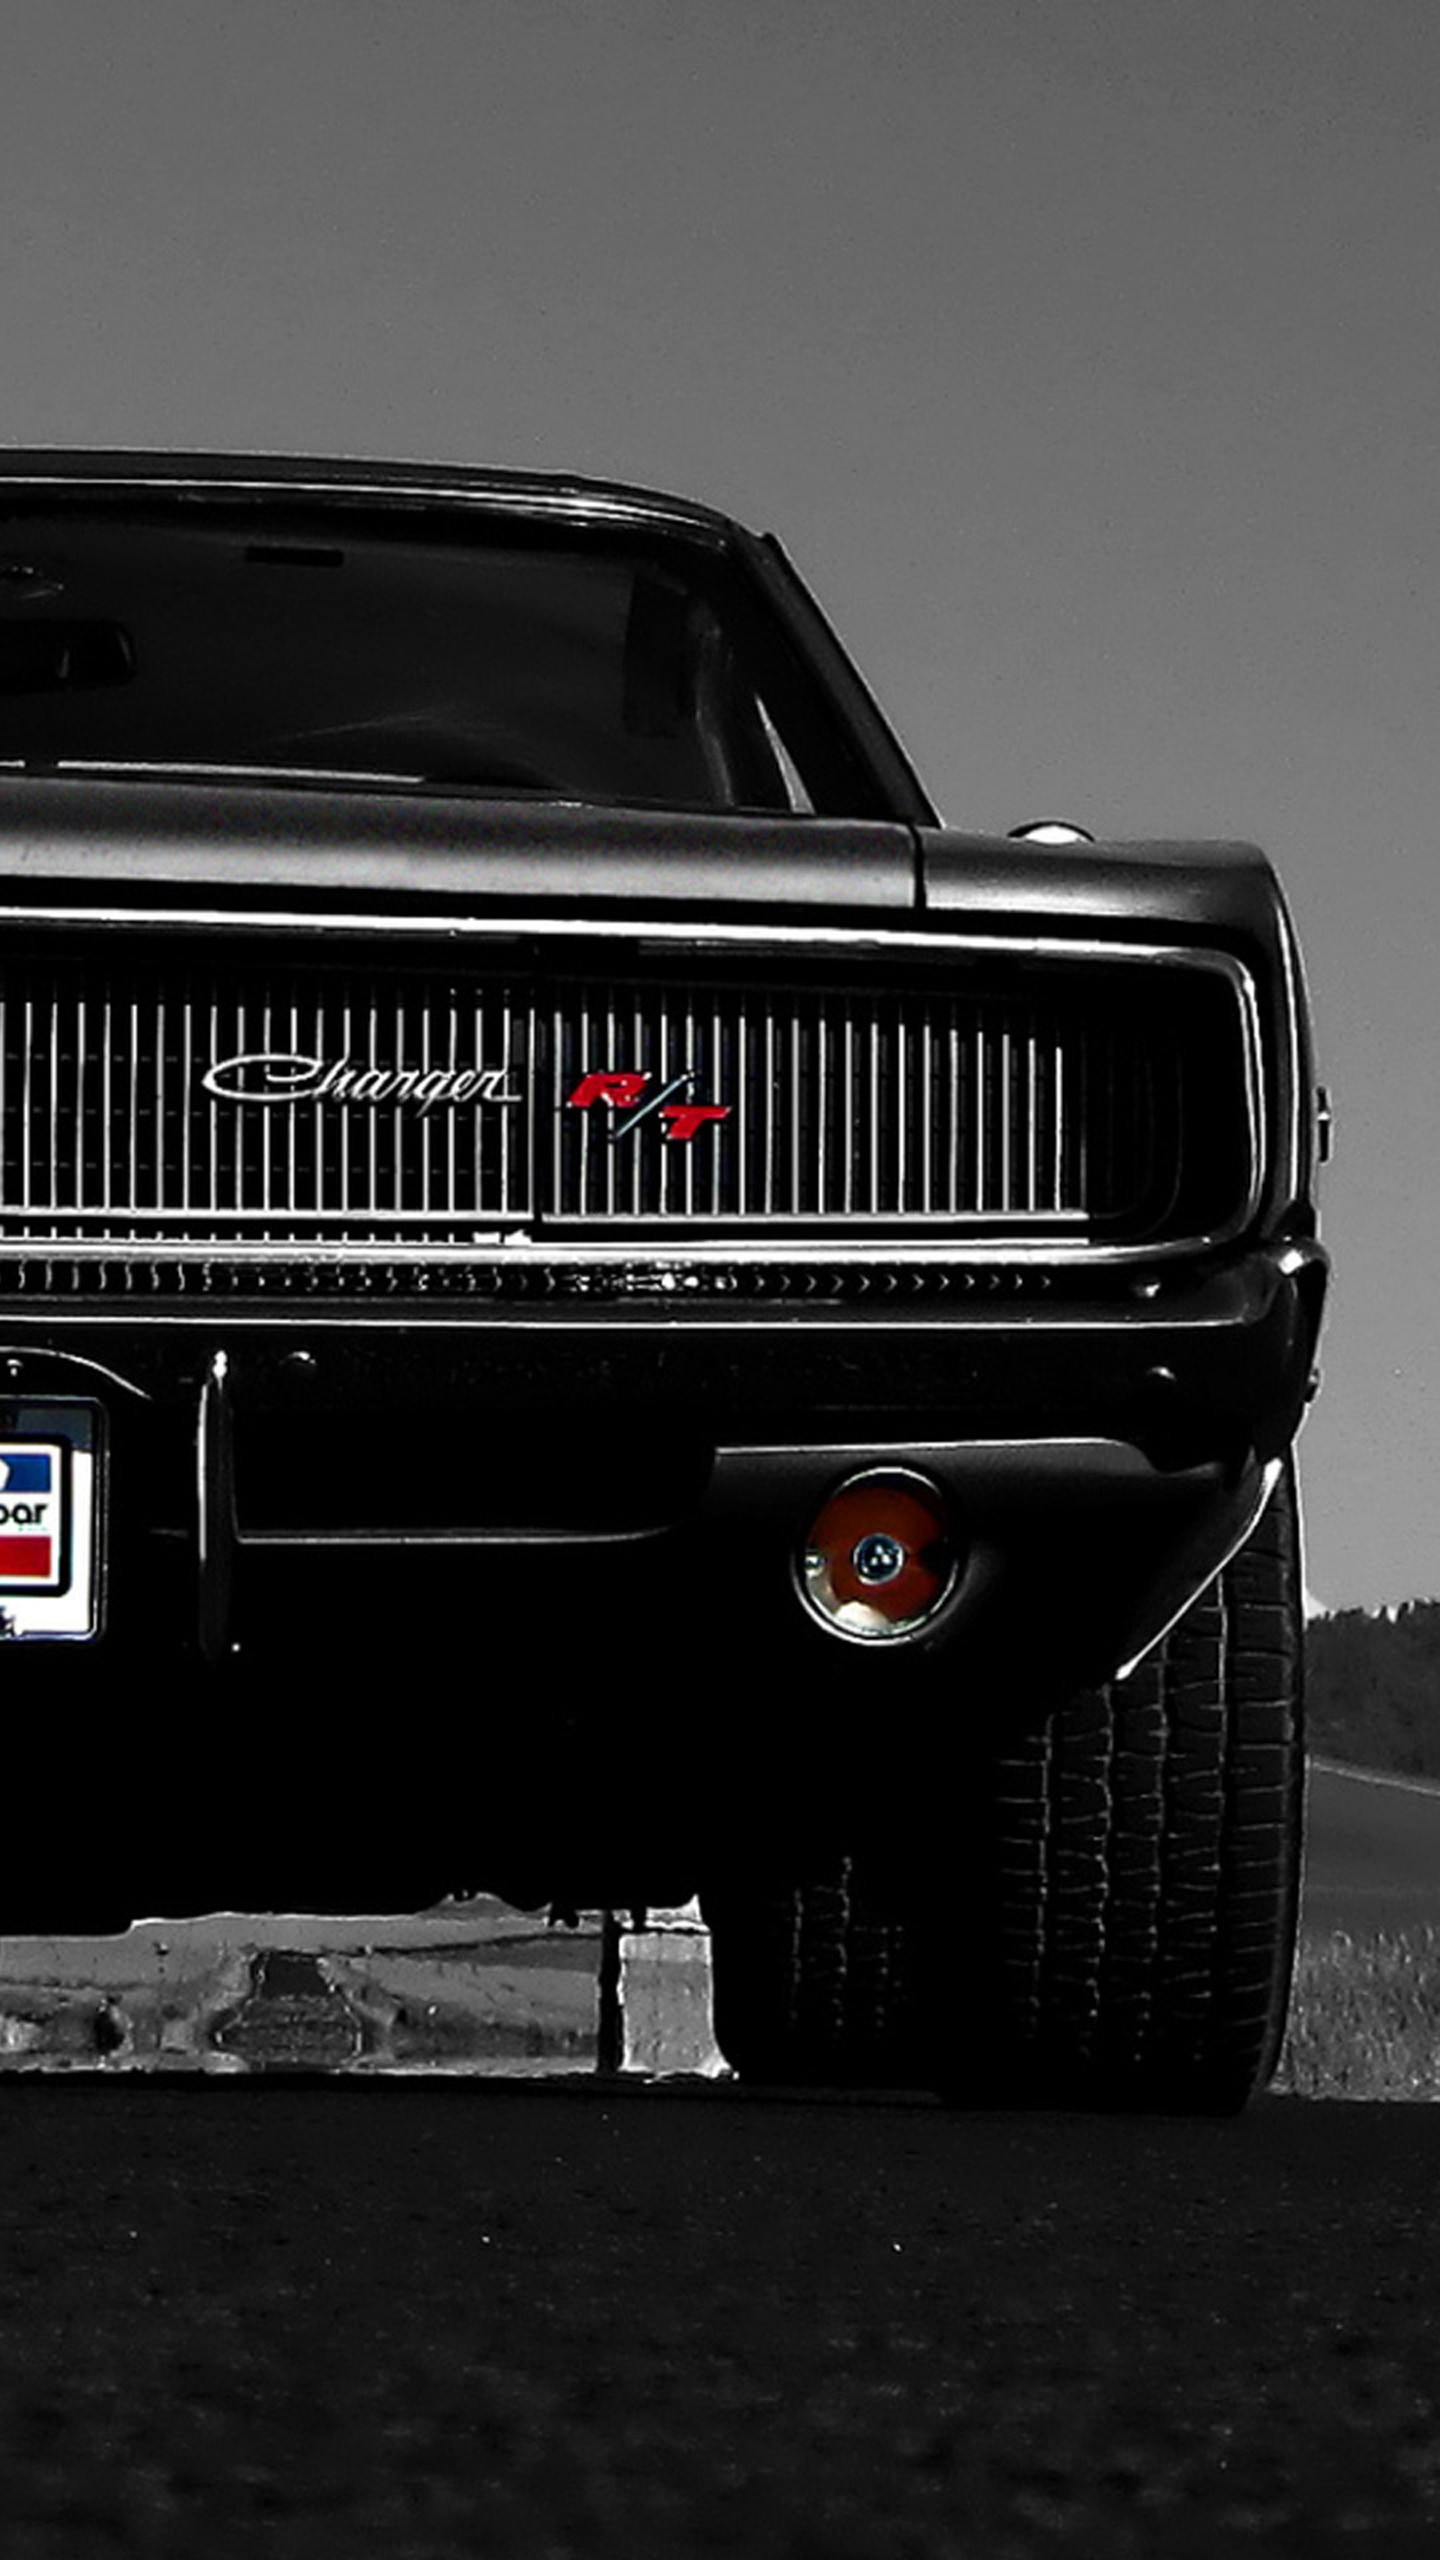 Charger RT, Dodge Charger R T, Dodge, Black, Tires, Muscle Cars